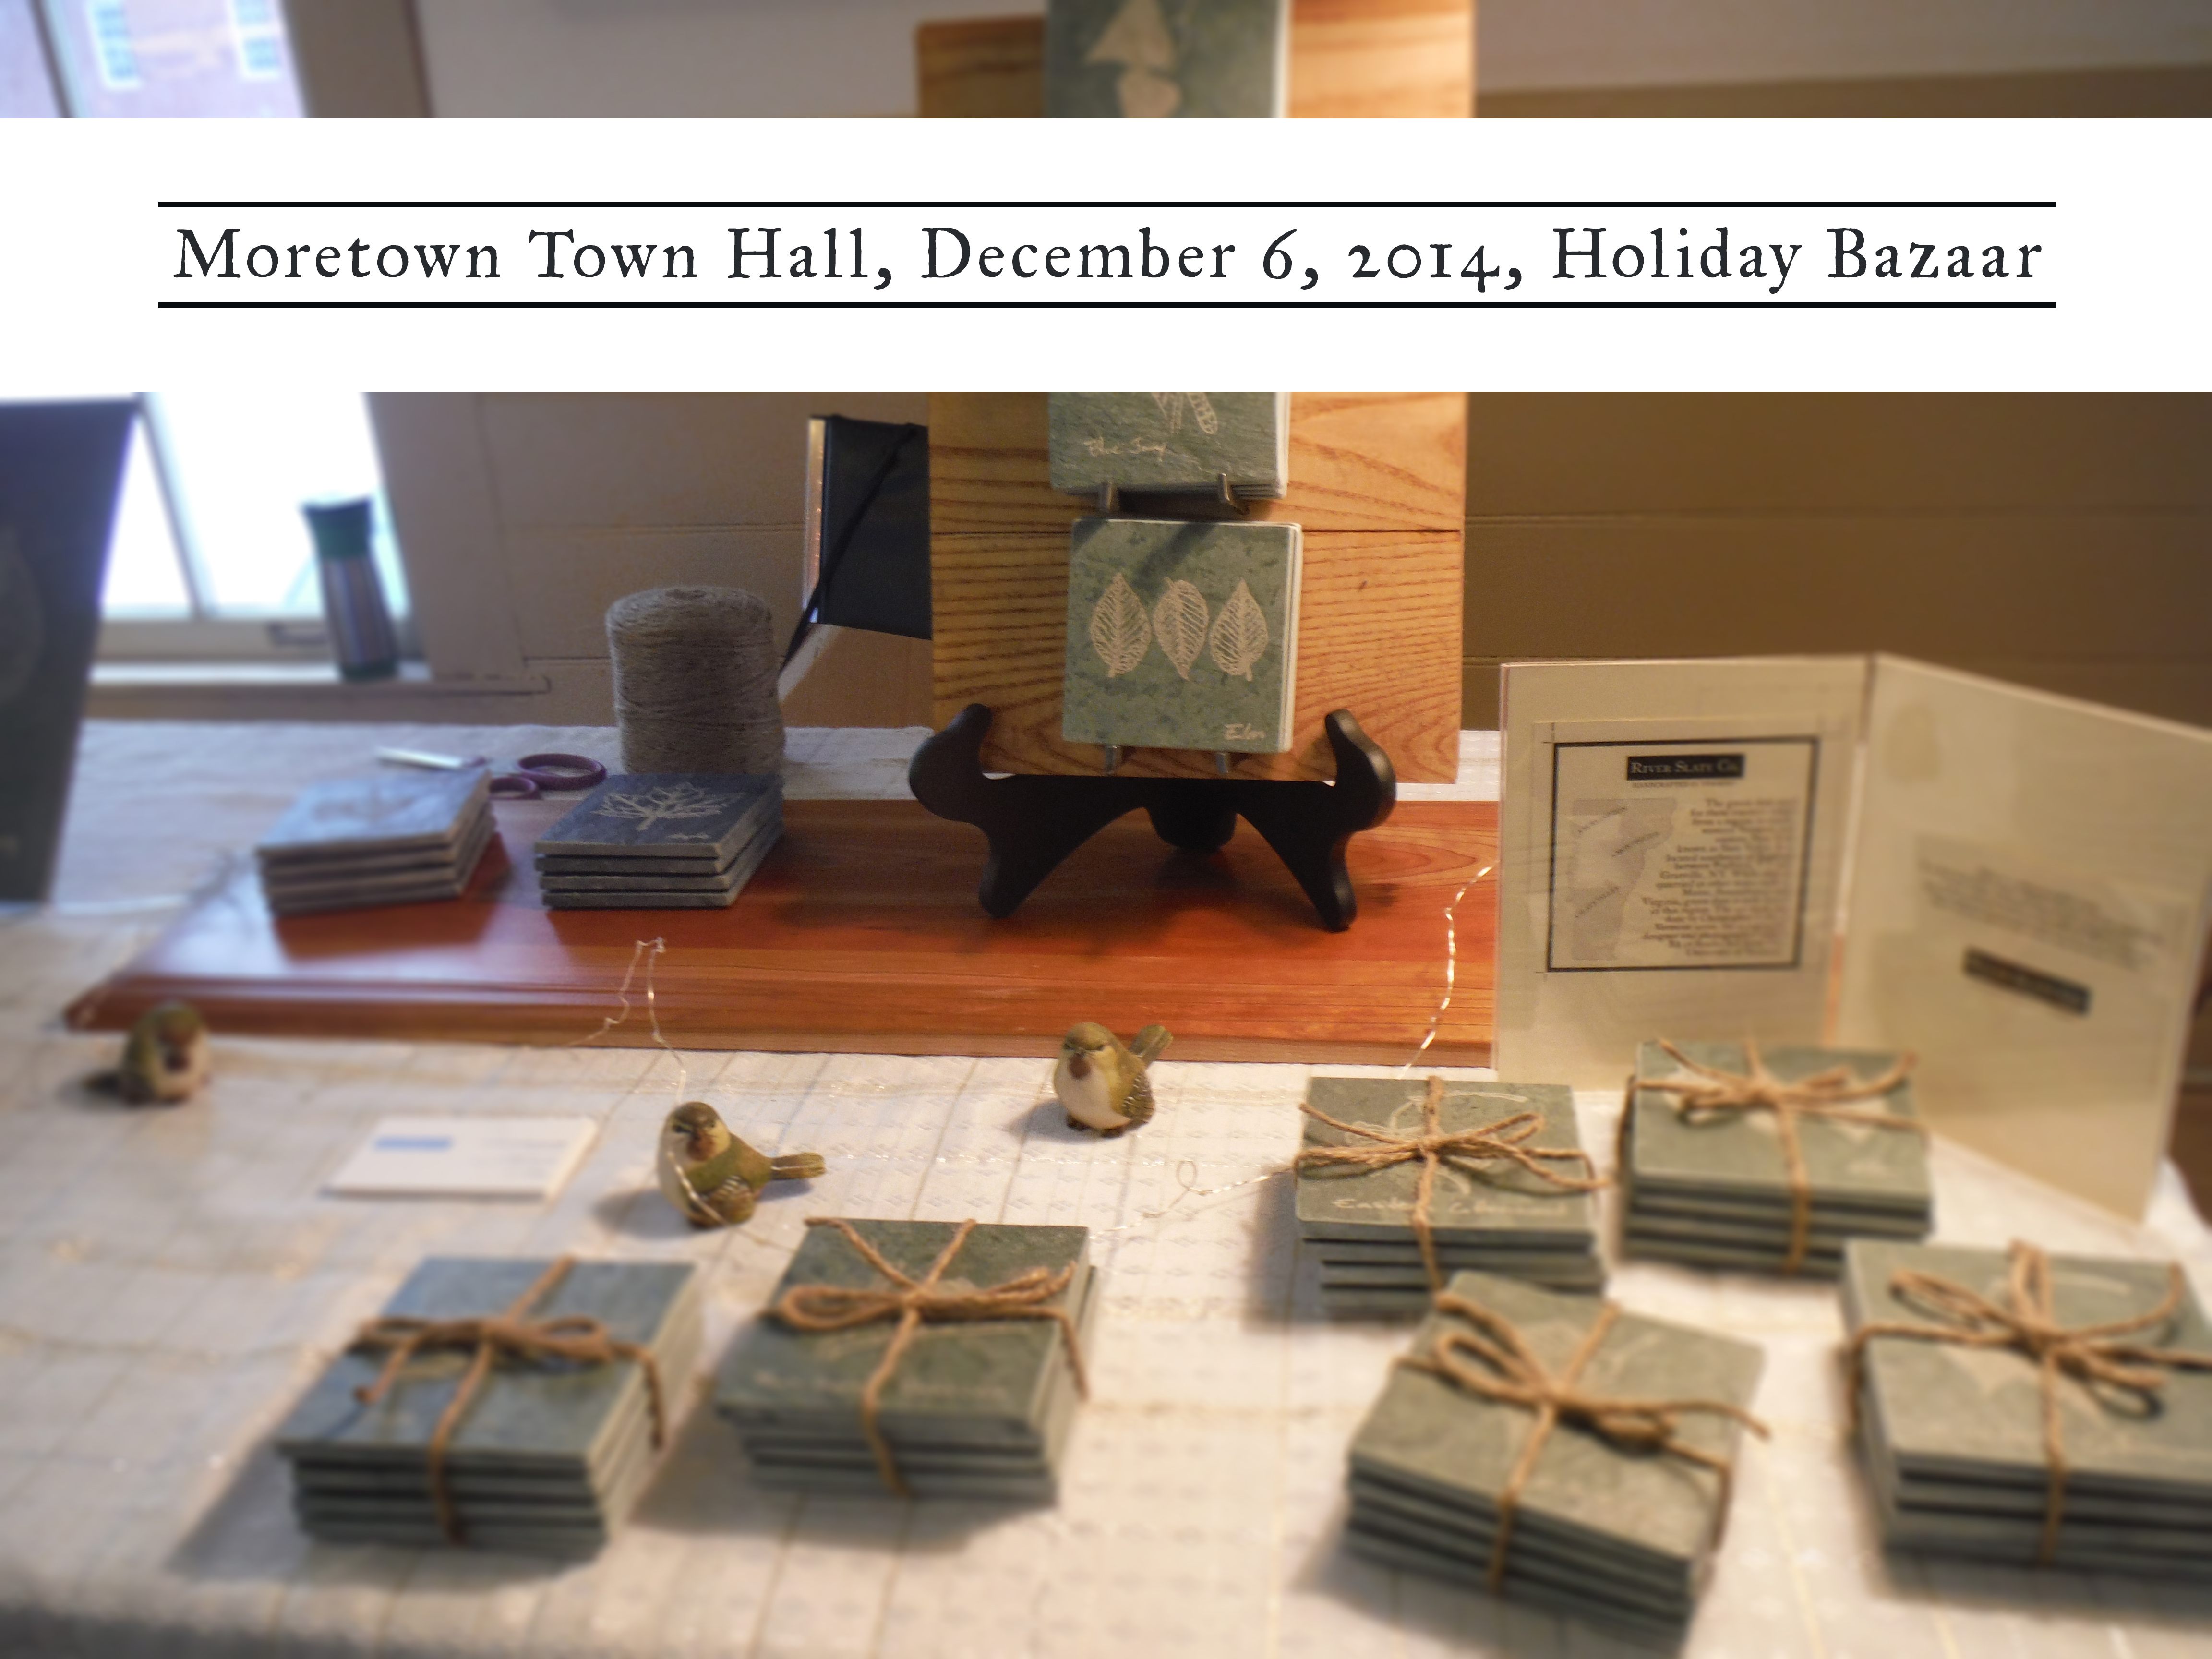 Setting up at craft fair in Moretown, Vt – River Slate Co.